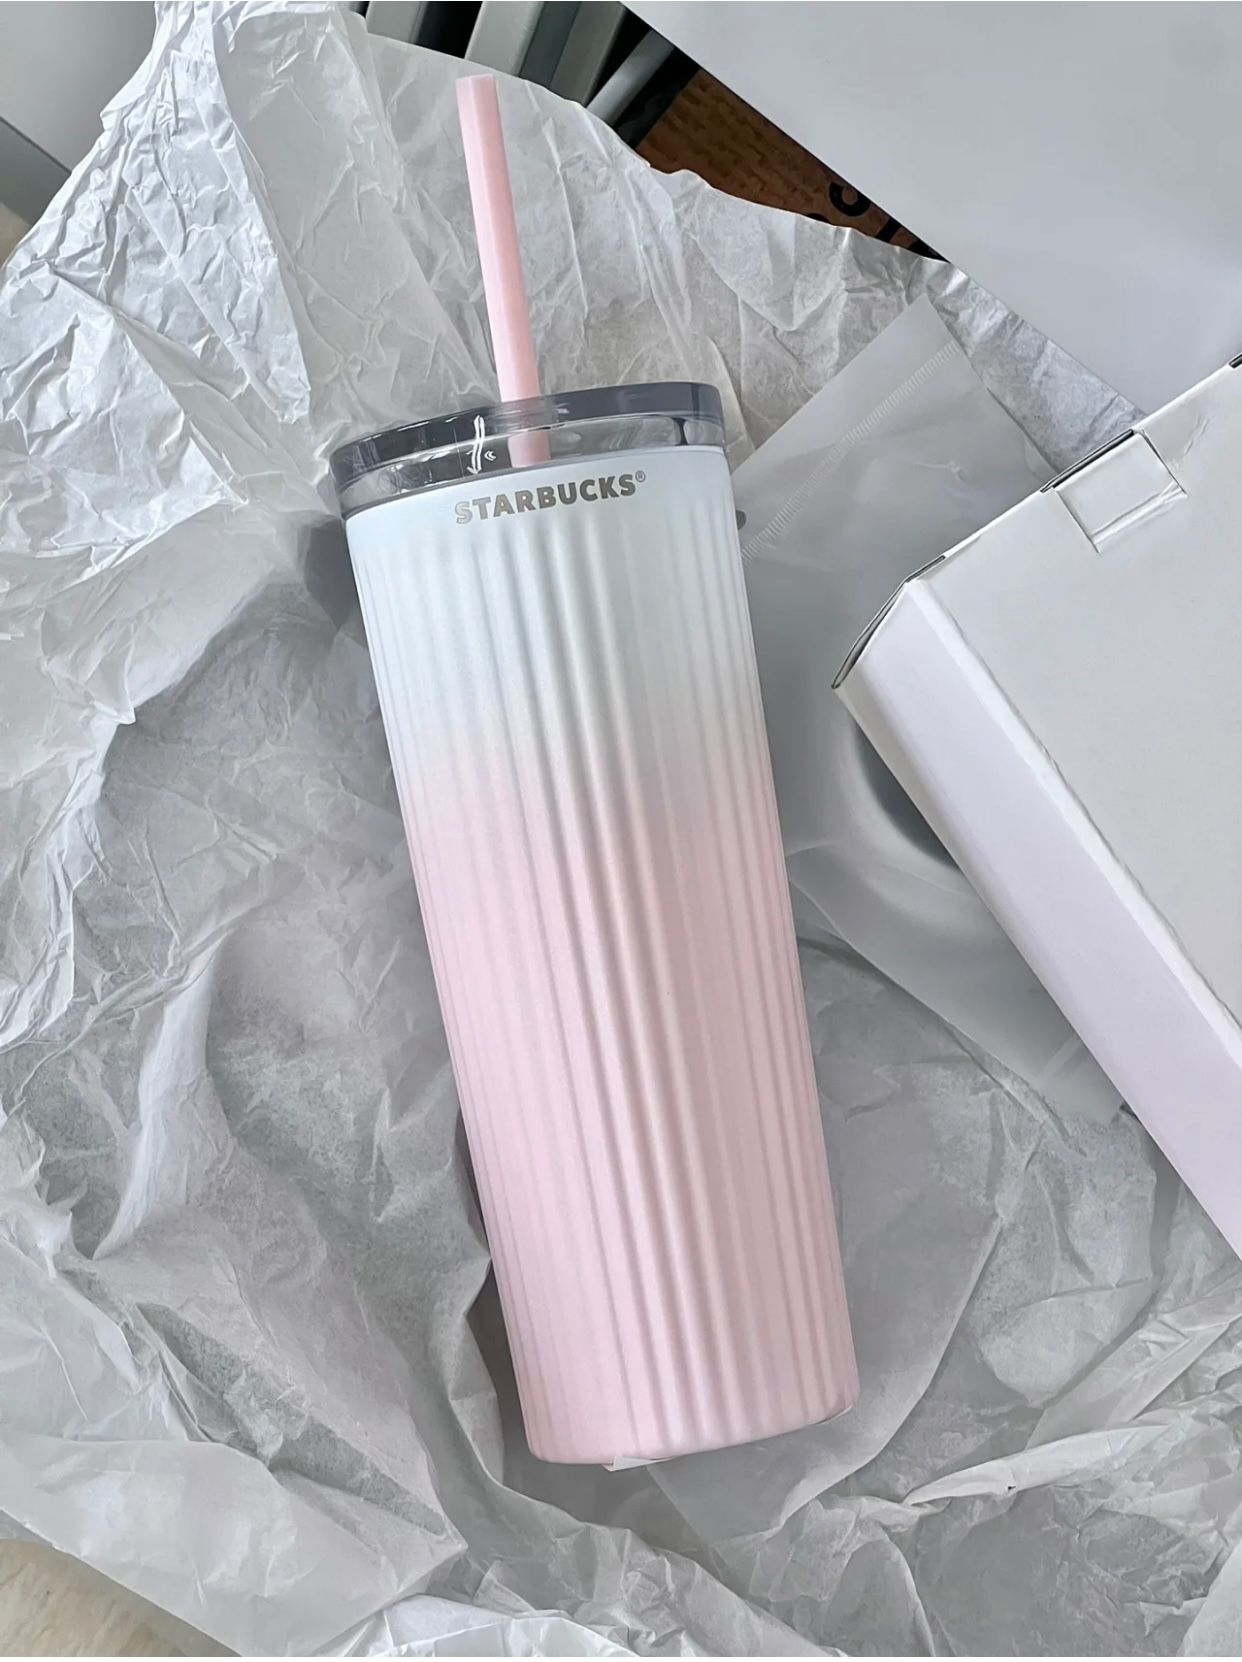 Starbucks China Ombre Peach Pink Gradient Studded Tumbler Cup